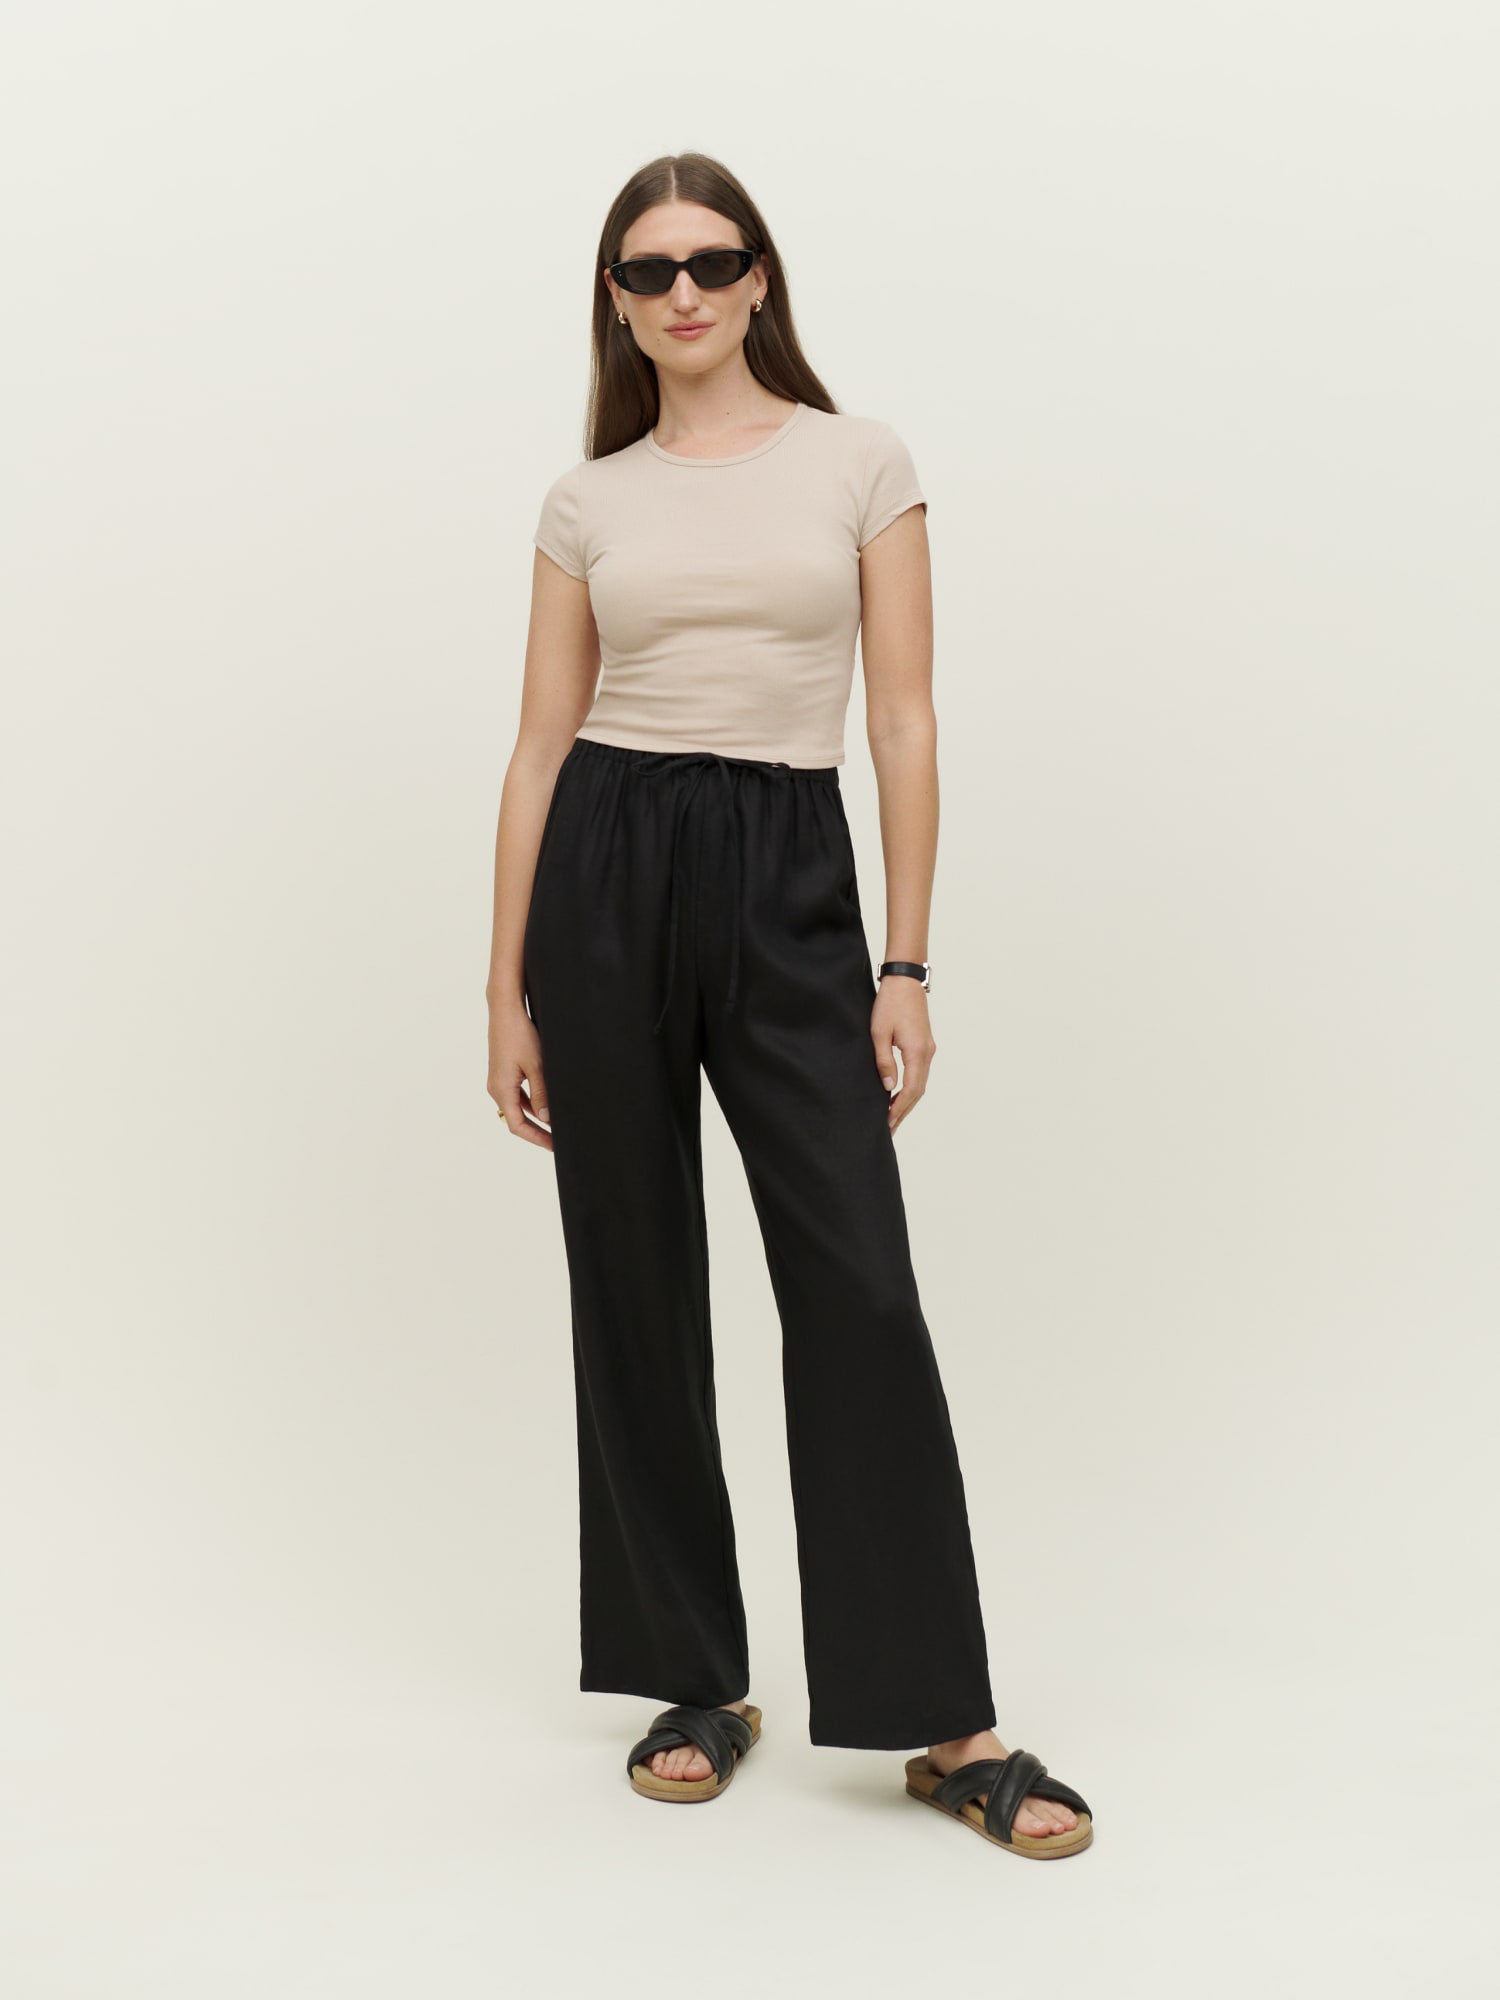 FLARED LINEN PANTS STYLE 1820 – JSong Way